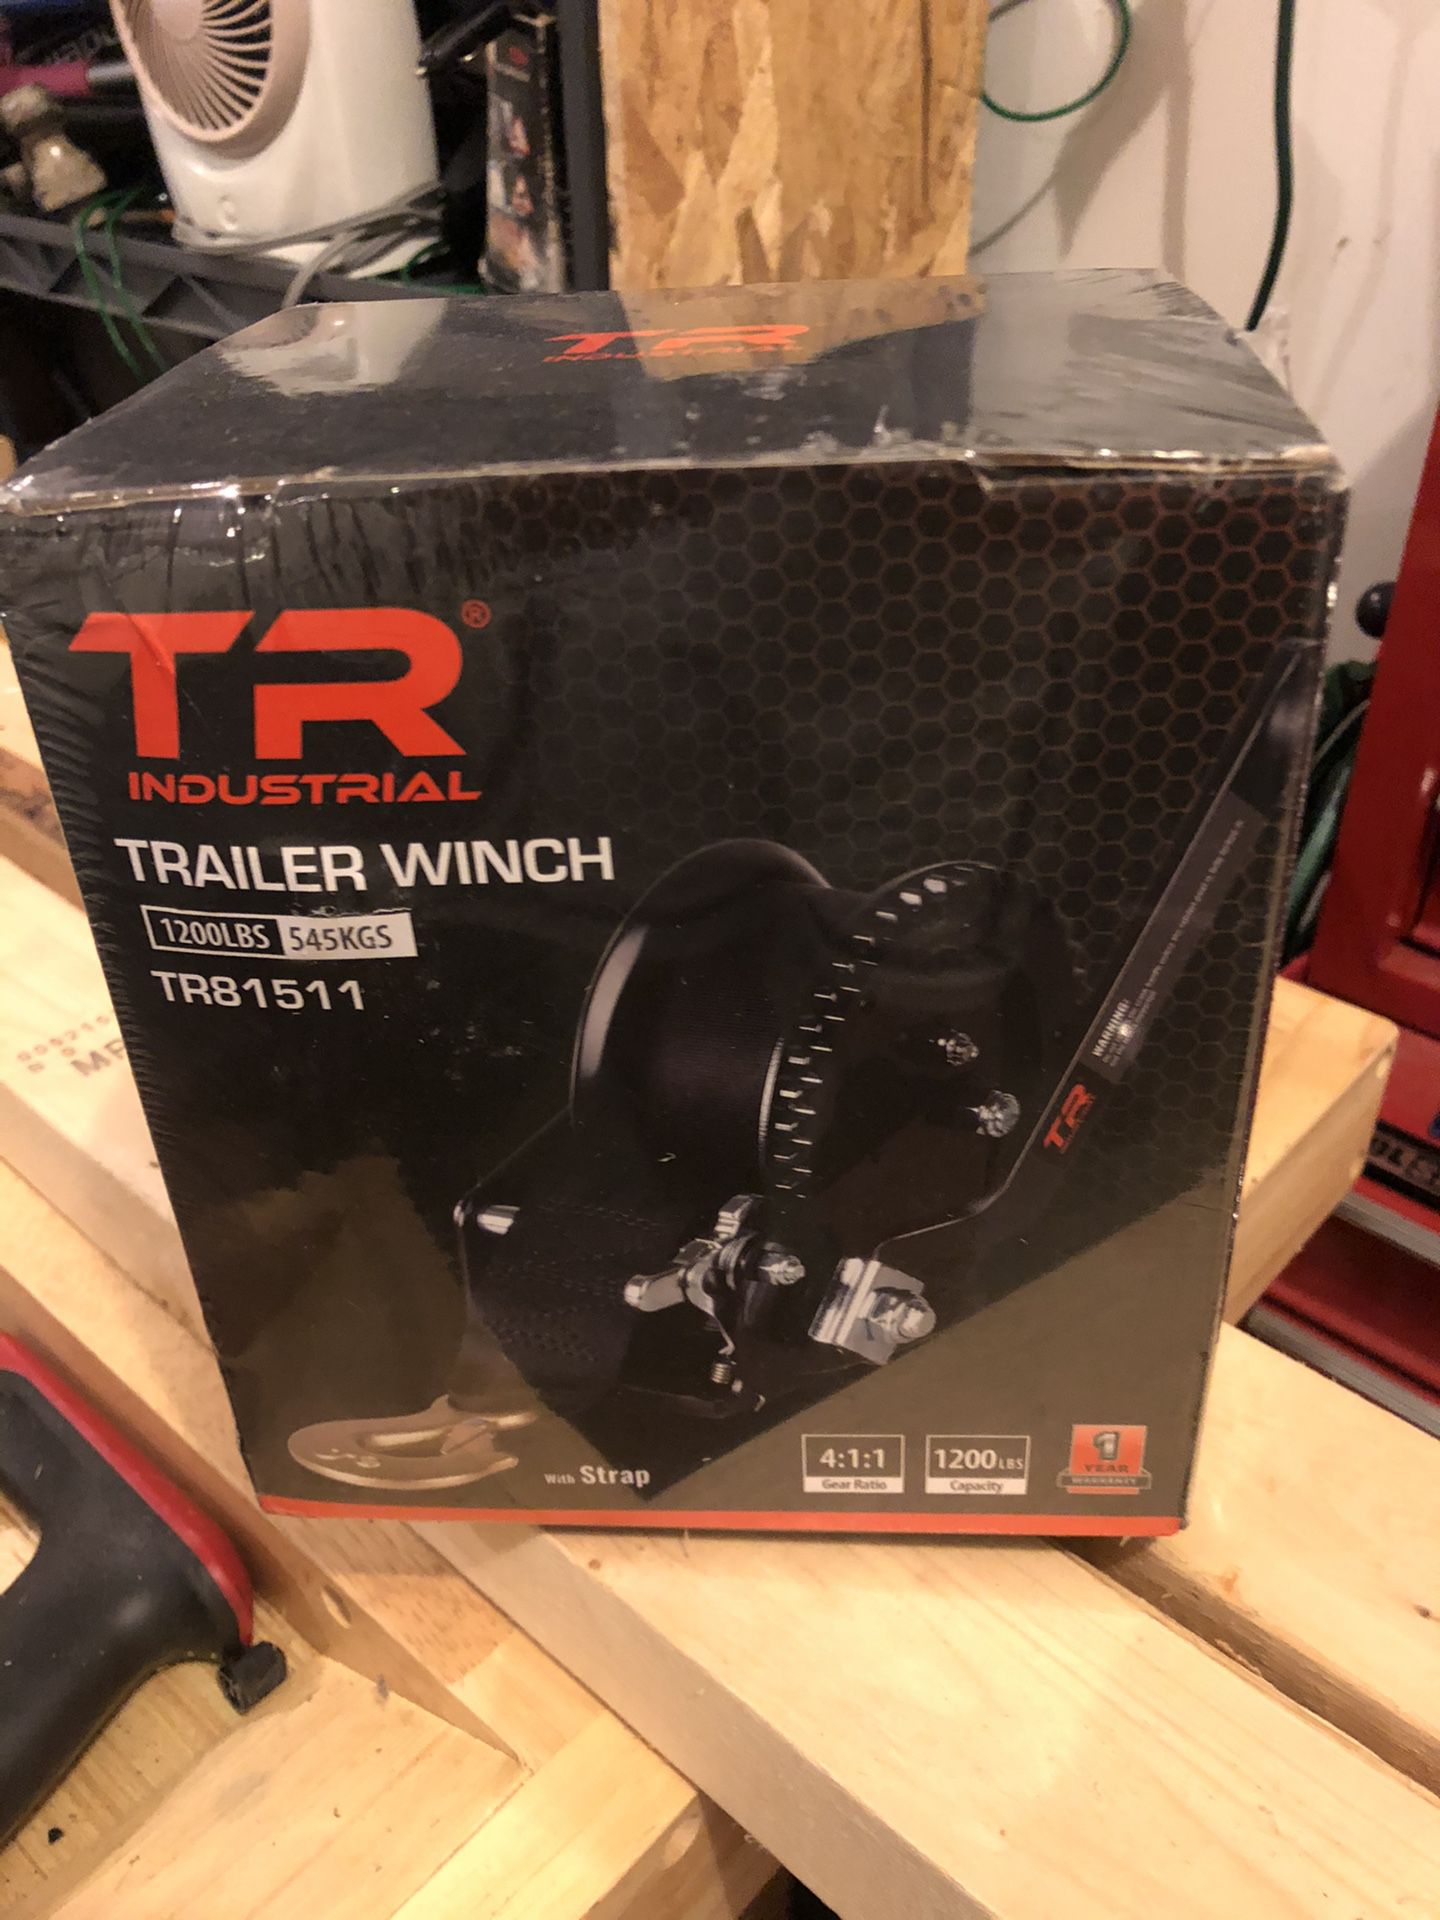 Trailer winch with pre installed 20’ strap and hook brand new in the box